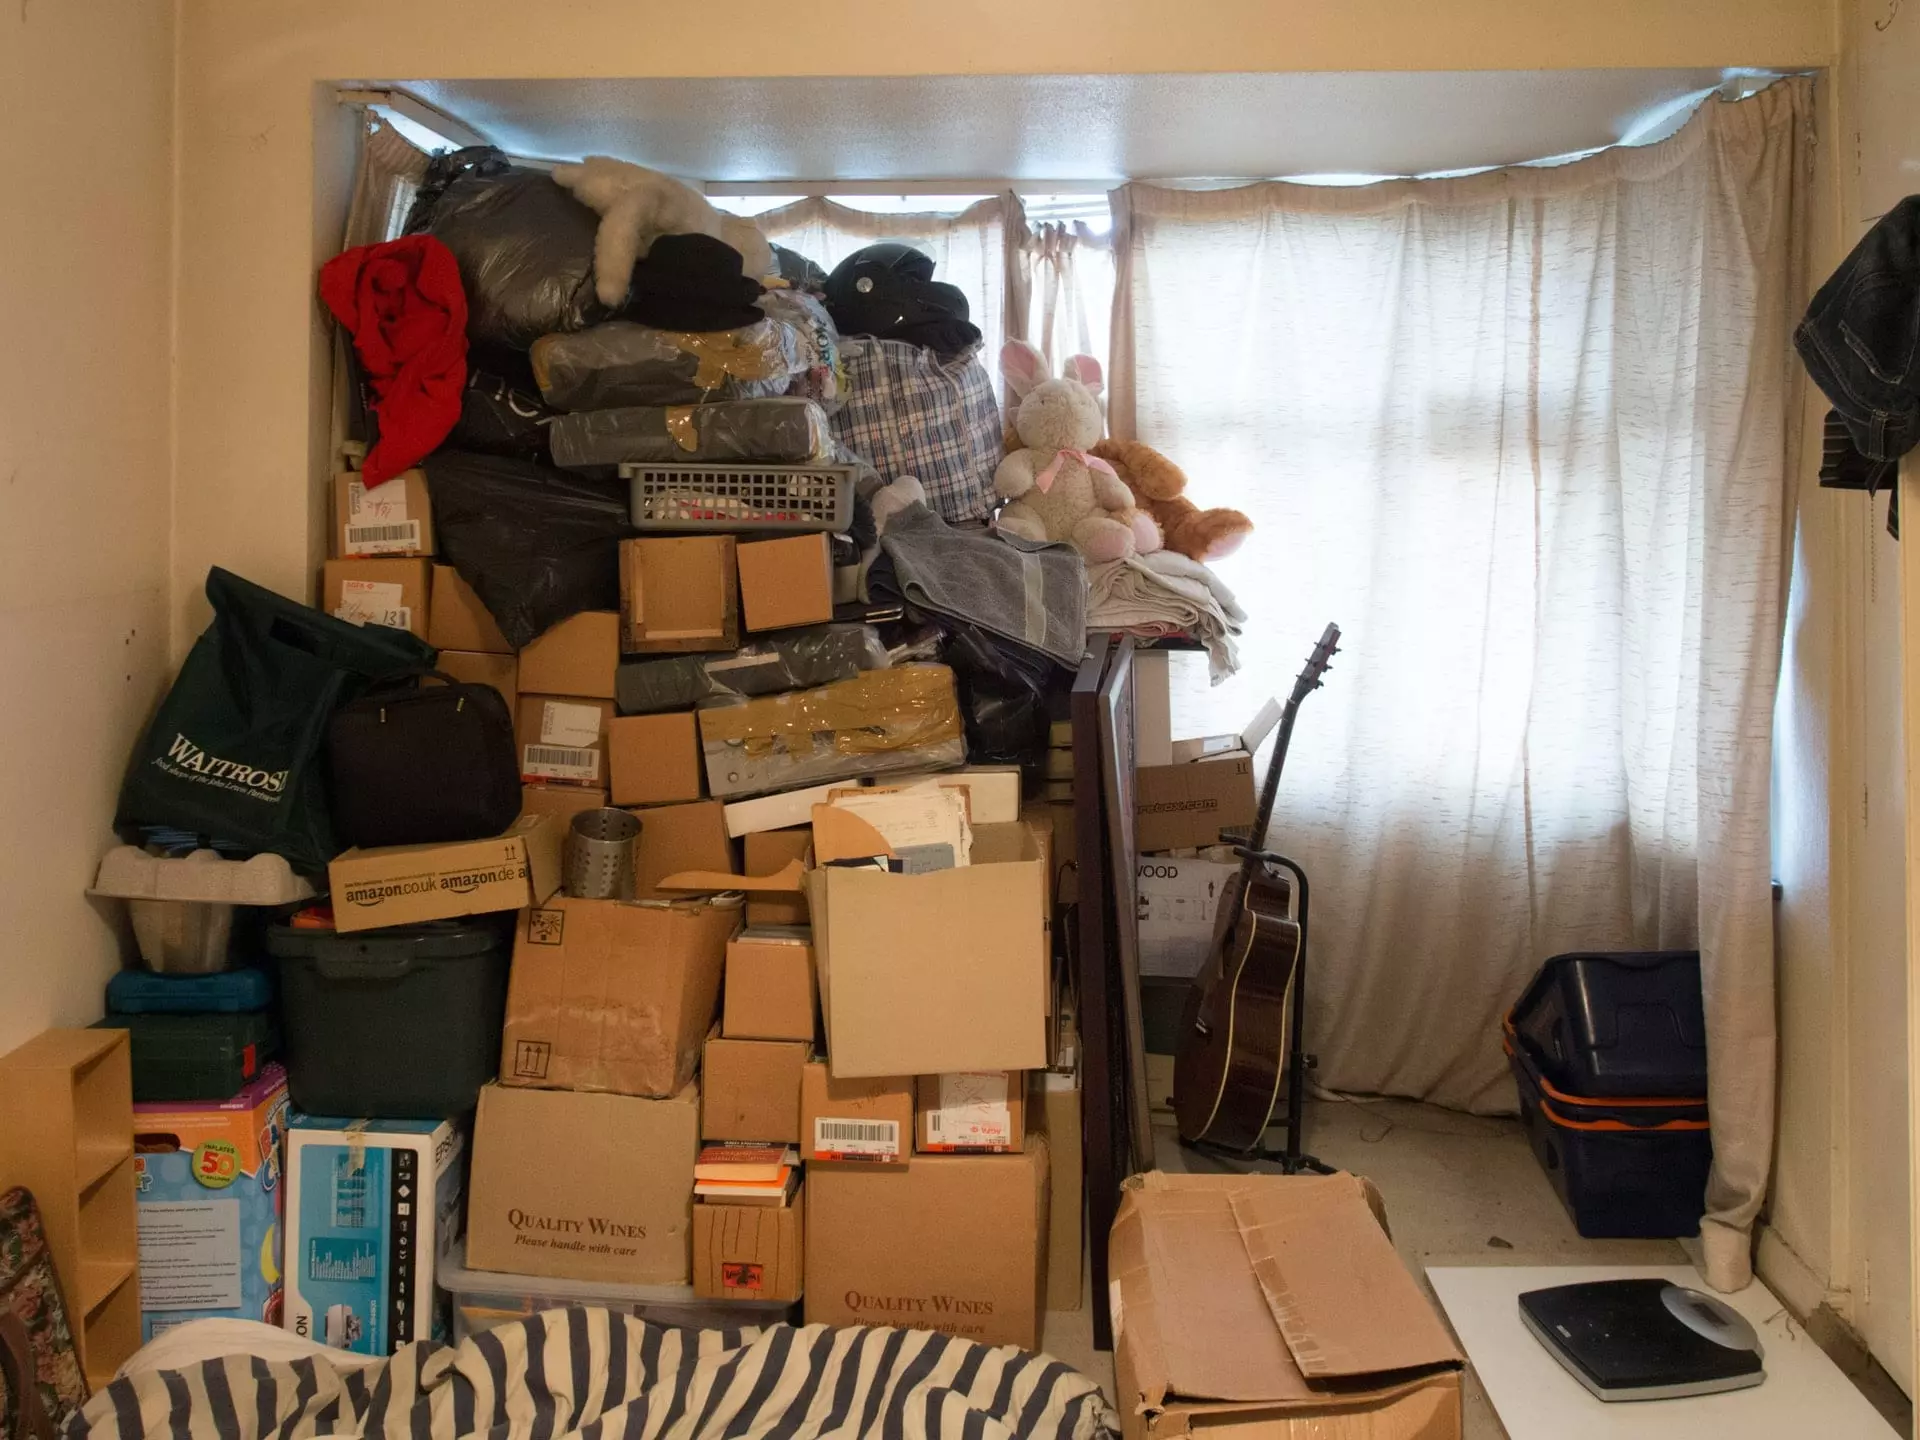 Reasons to Hire a Professional Organizer When Moving